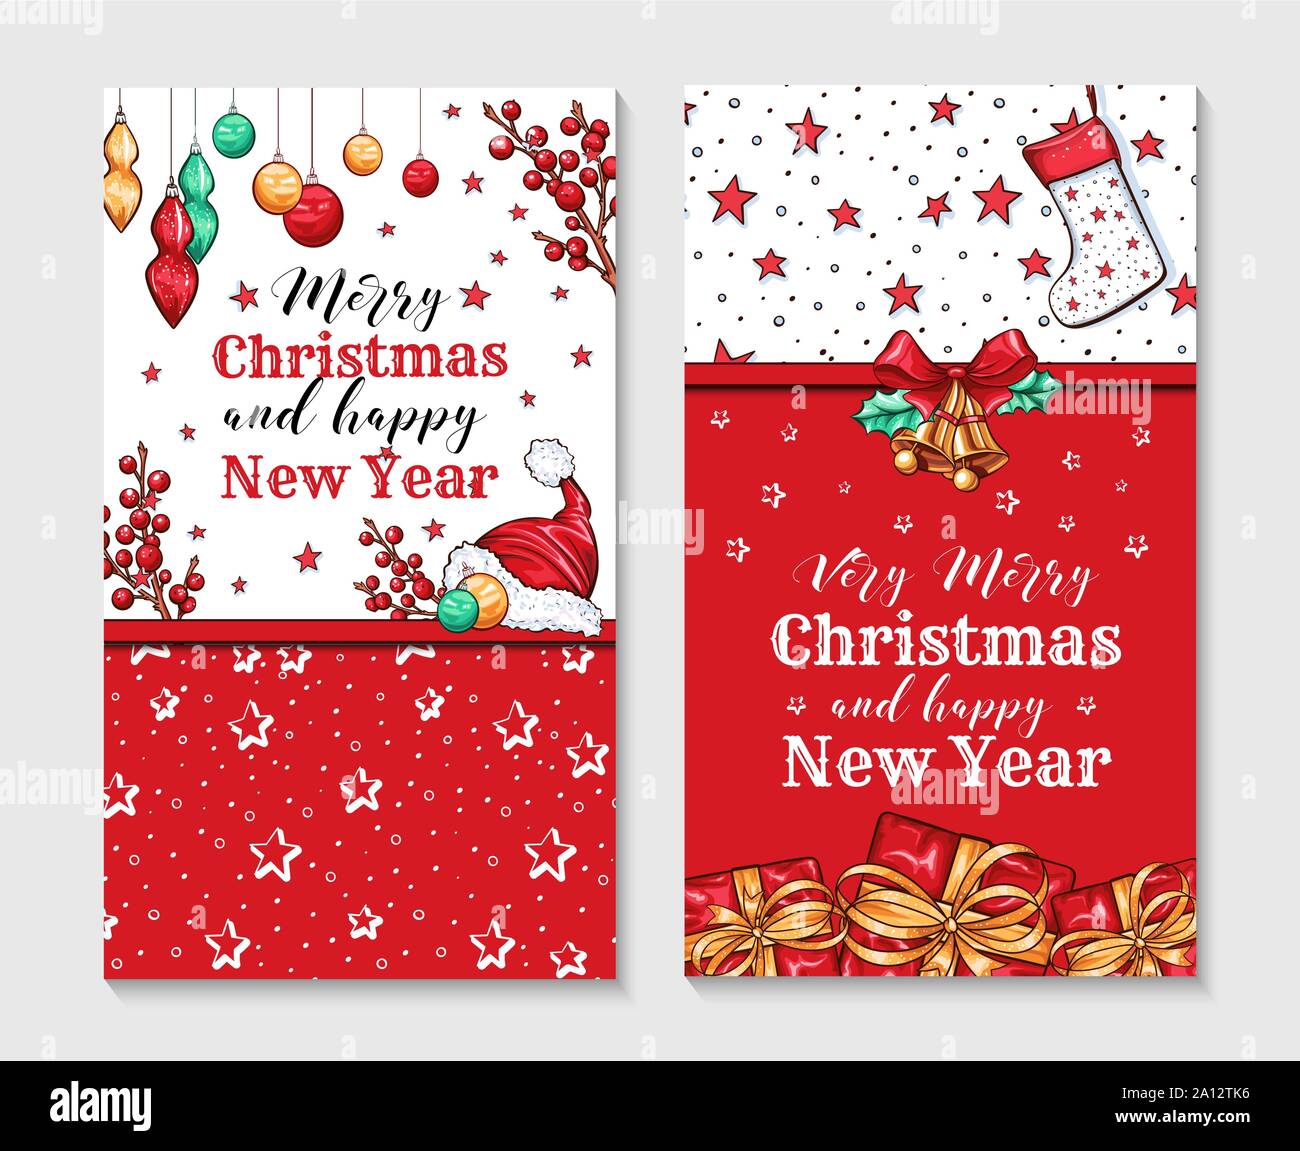 Very Merry Christmas holiday greeting cards vector templates set. New Year postcards design pack. Hanging fir tree baubles and lettering on red background. Xmas celebration invitation layout Stock Vector